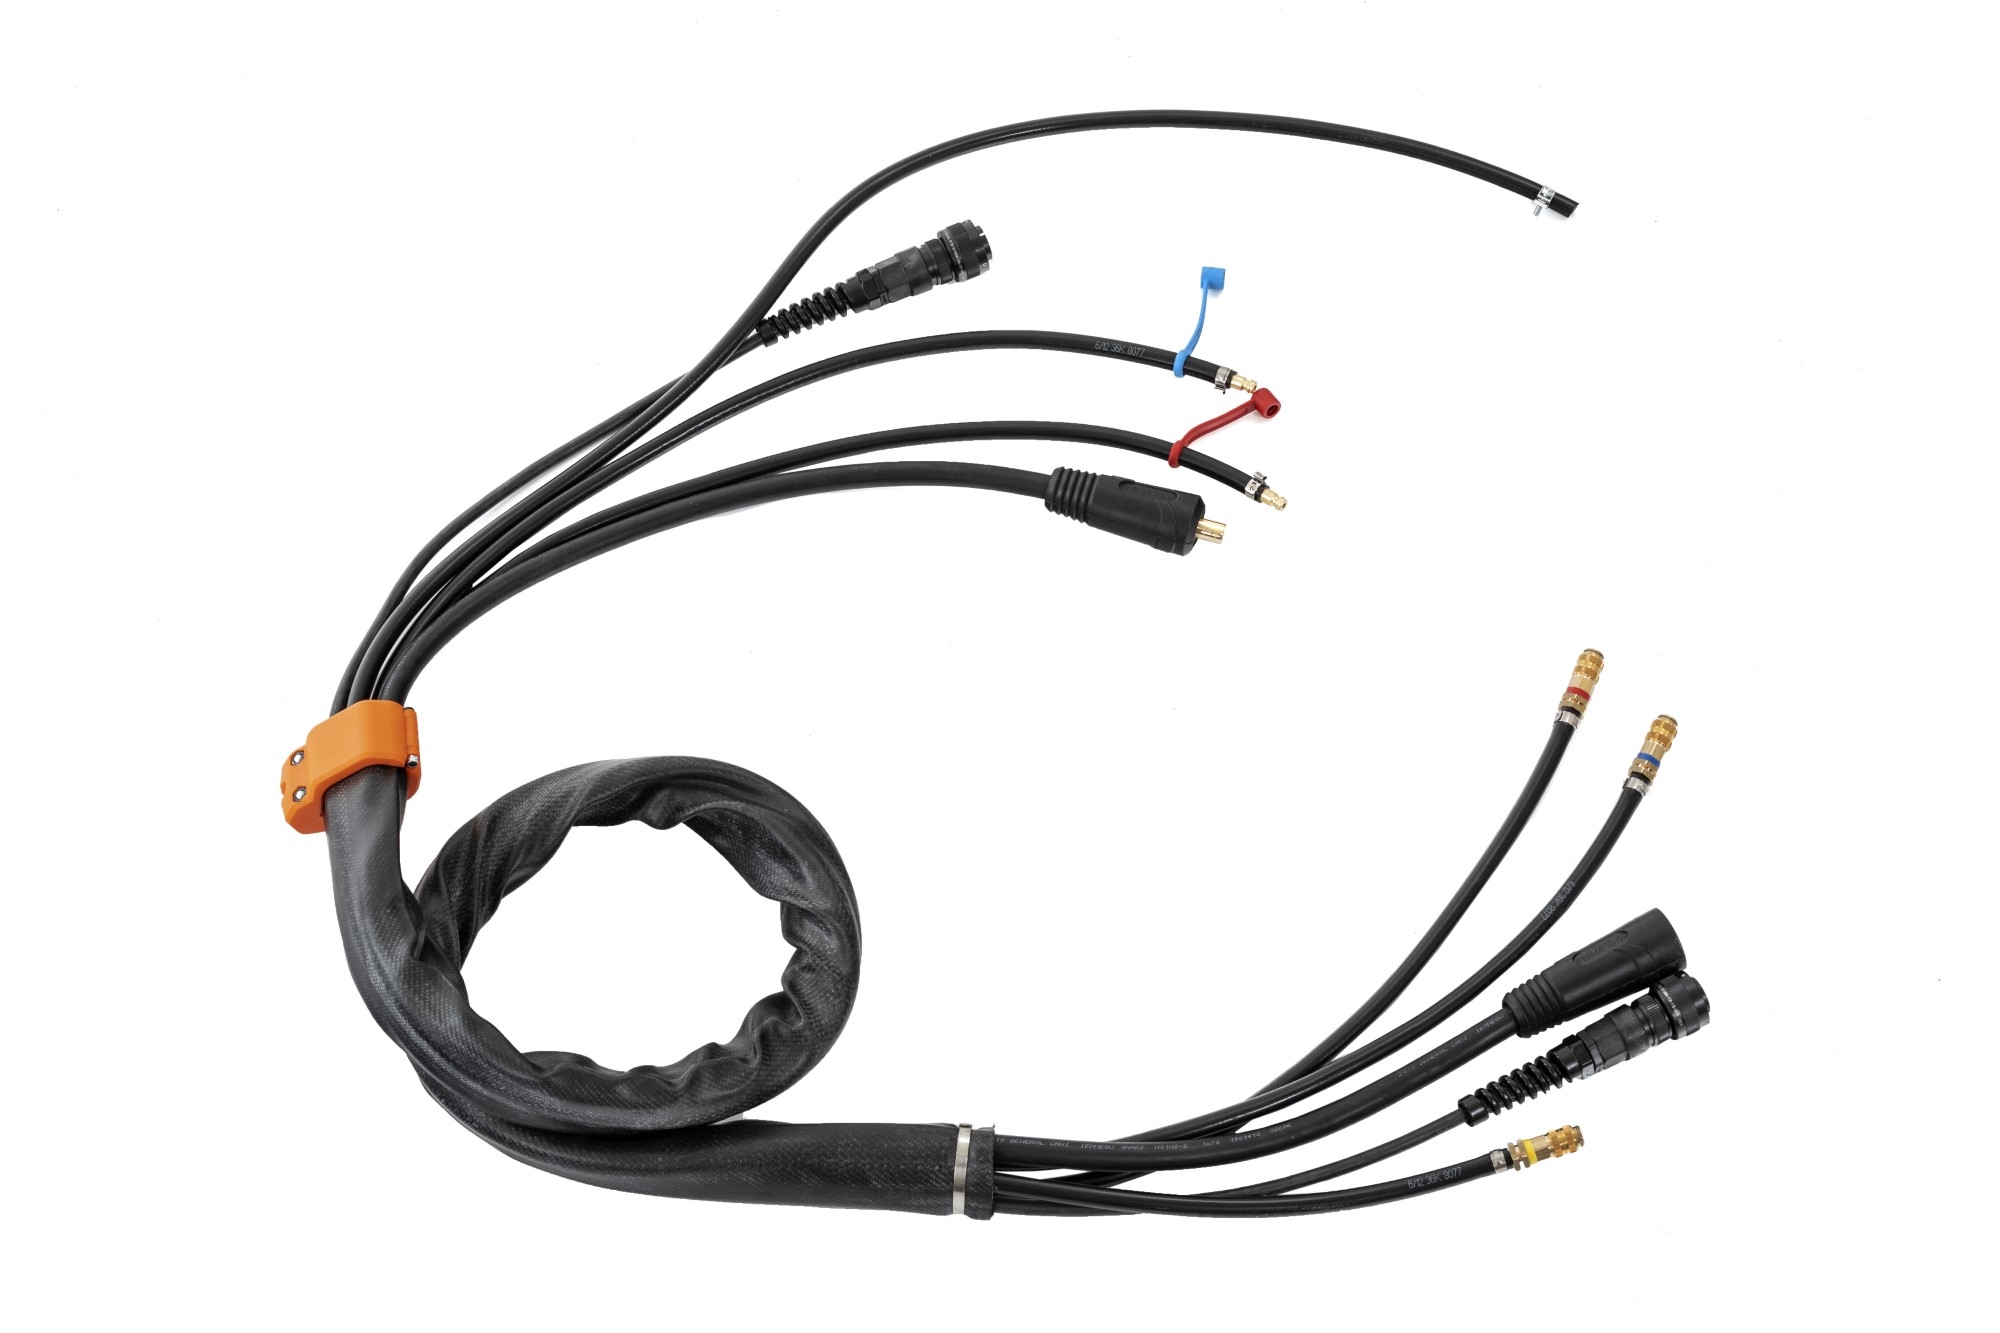 X5 Water Interconnection Cable Short